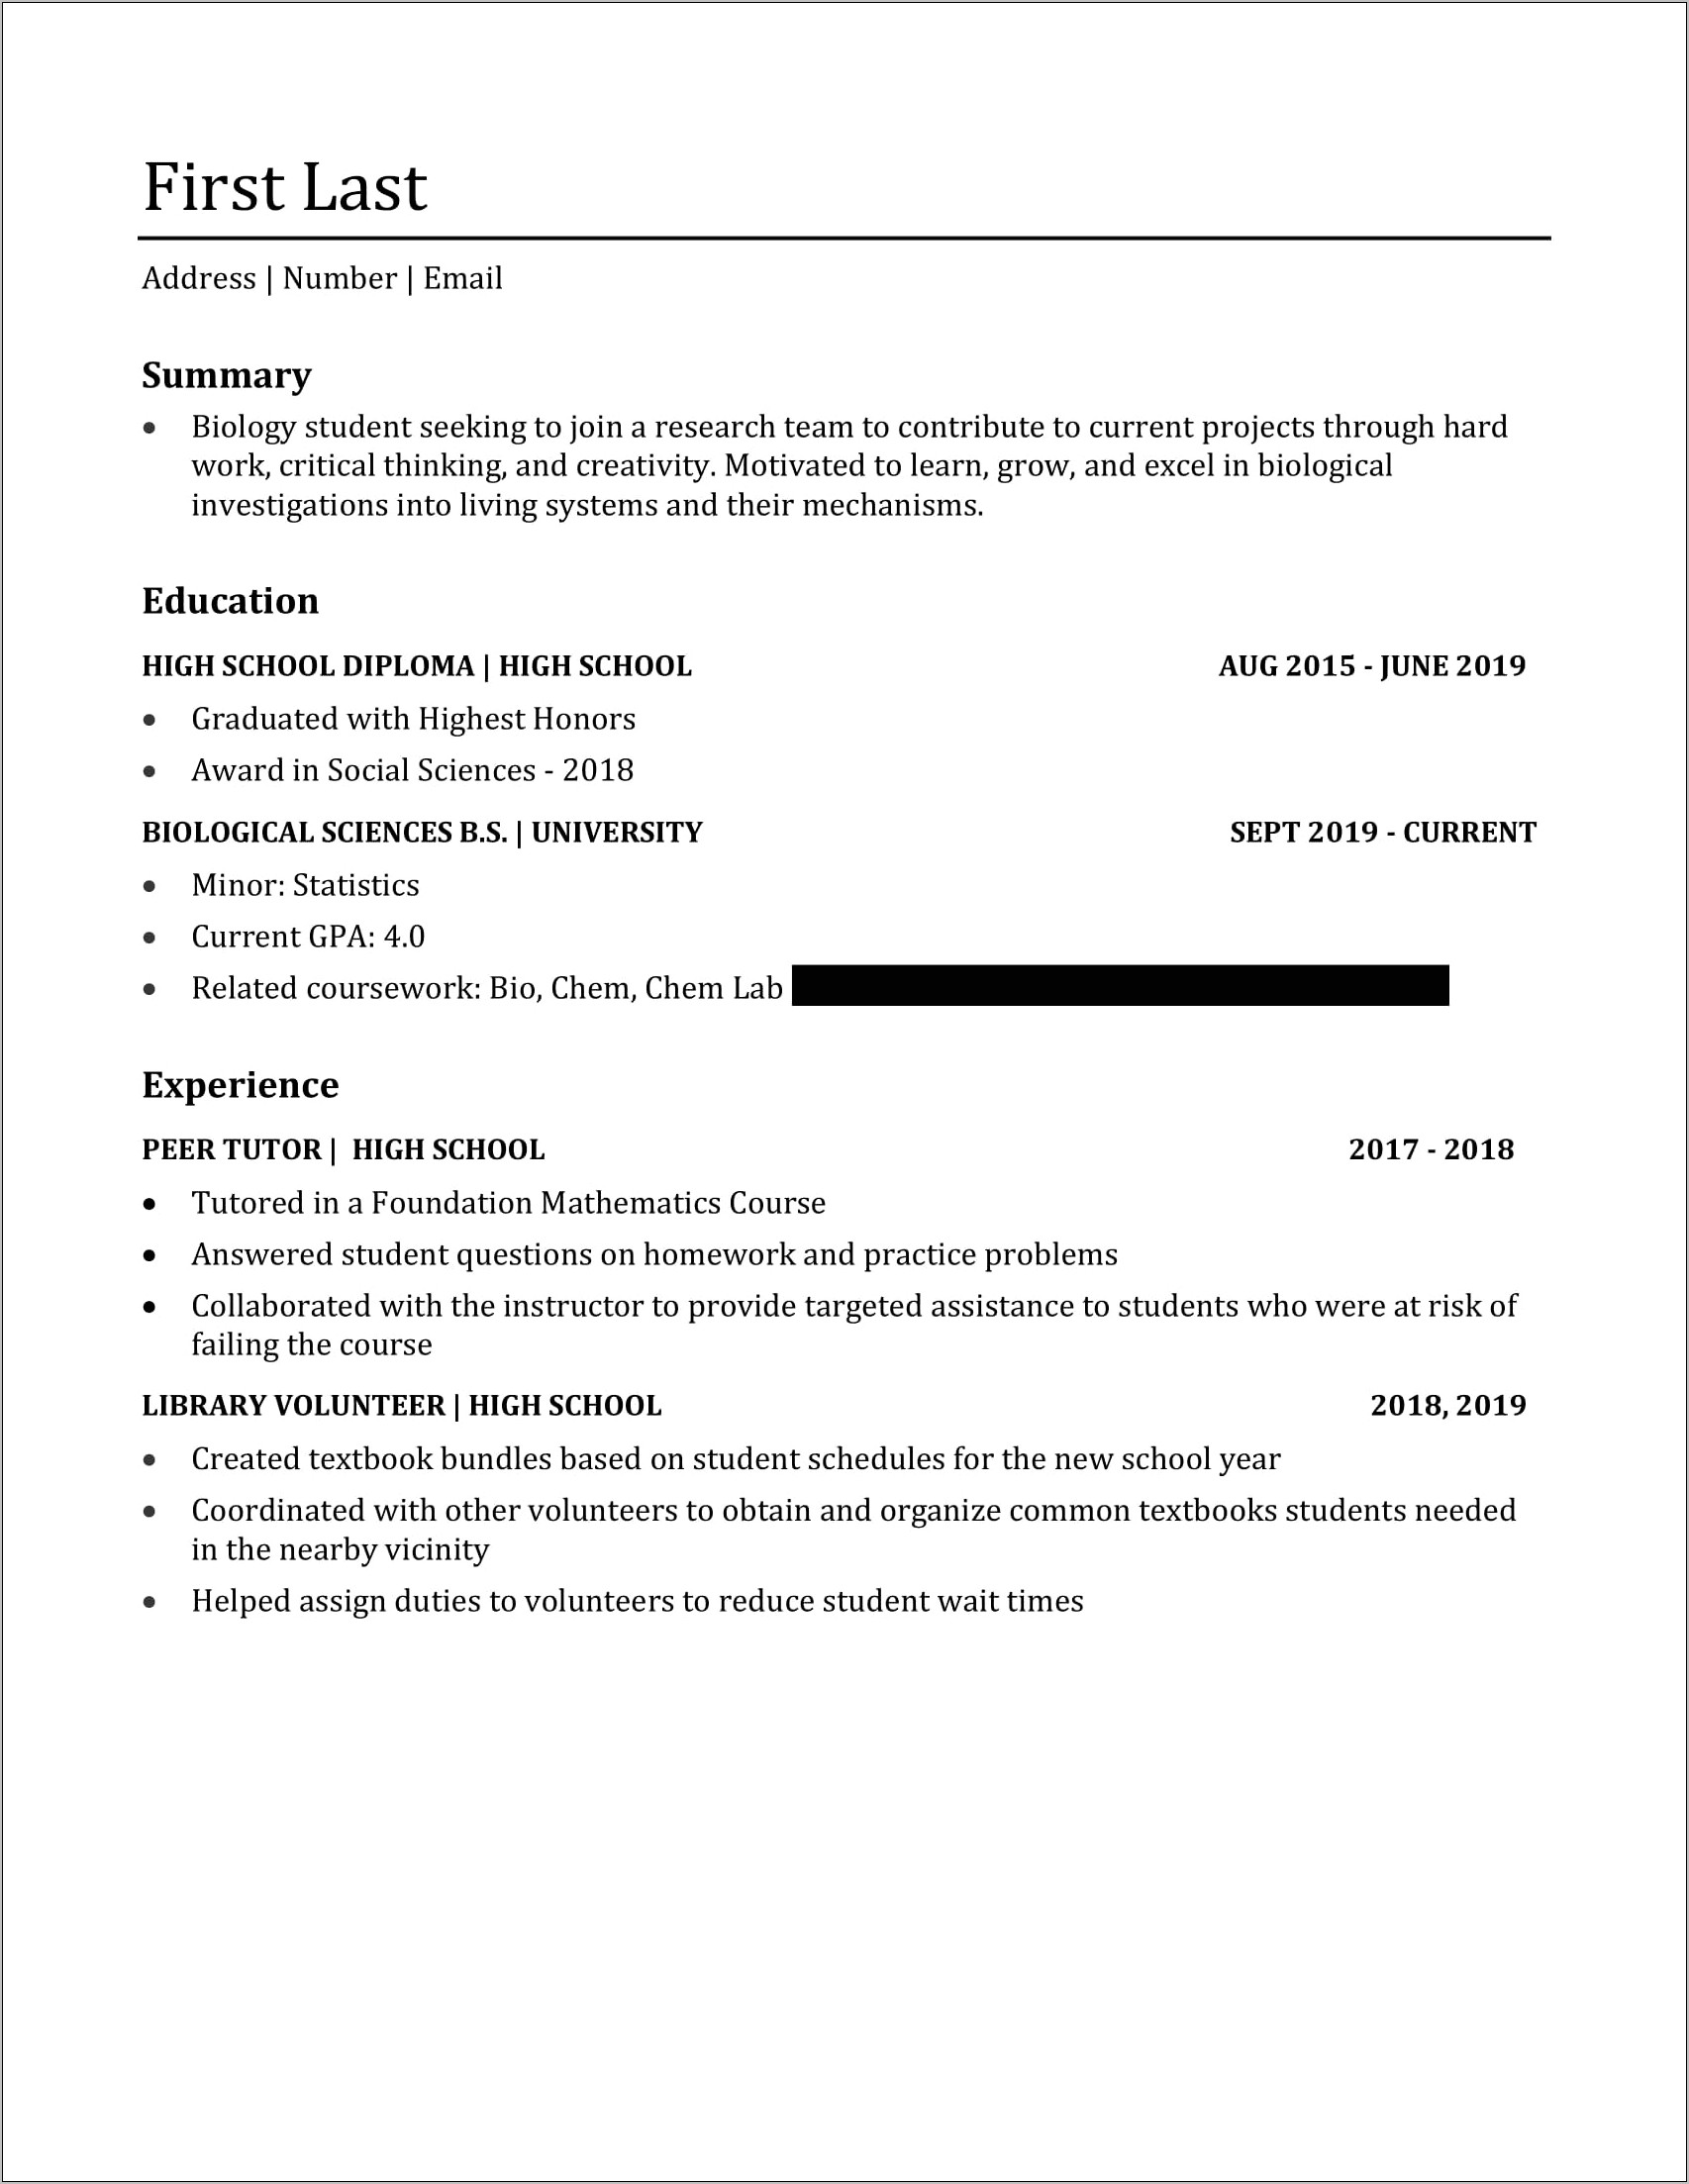 Is Research In High School Relevant For Resume